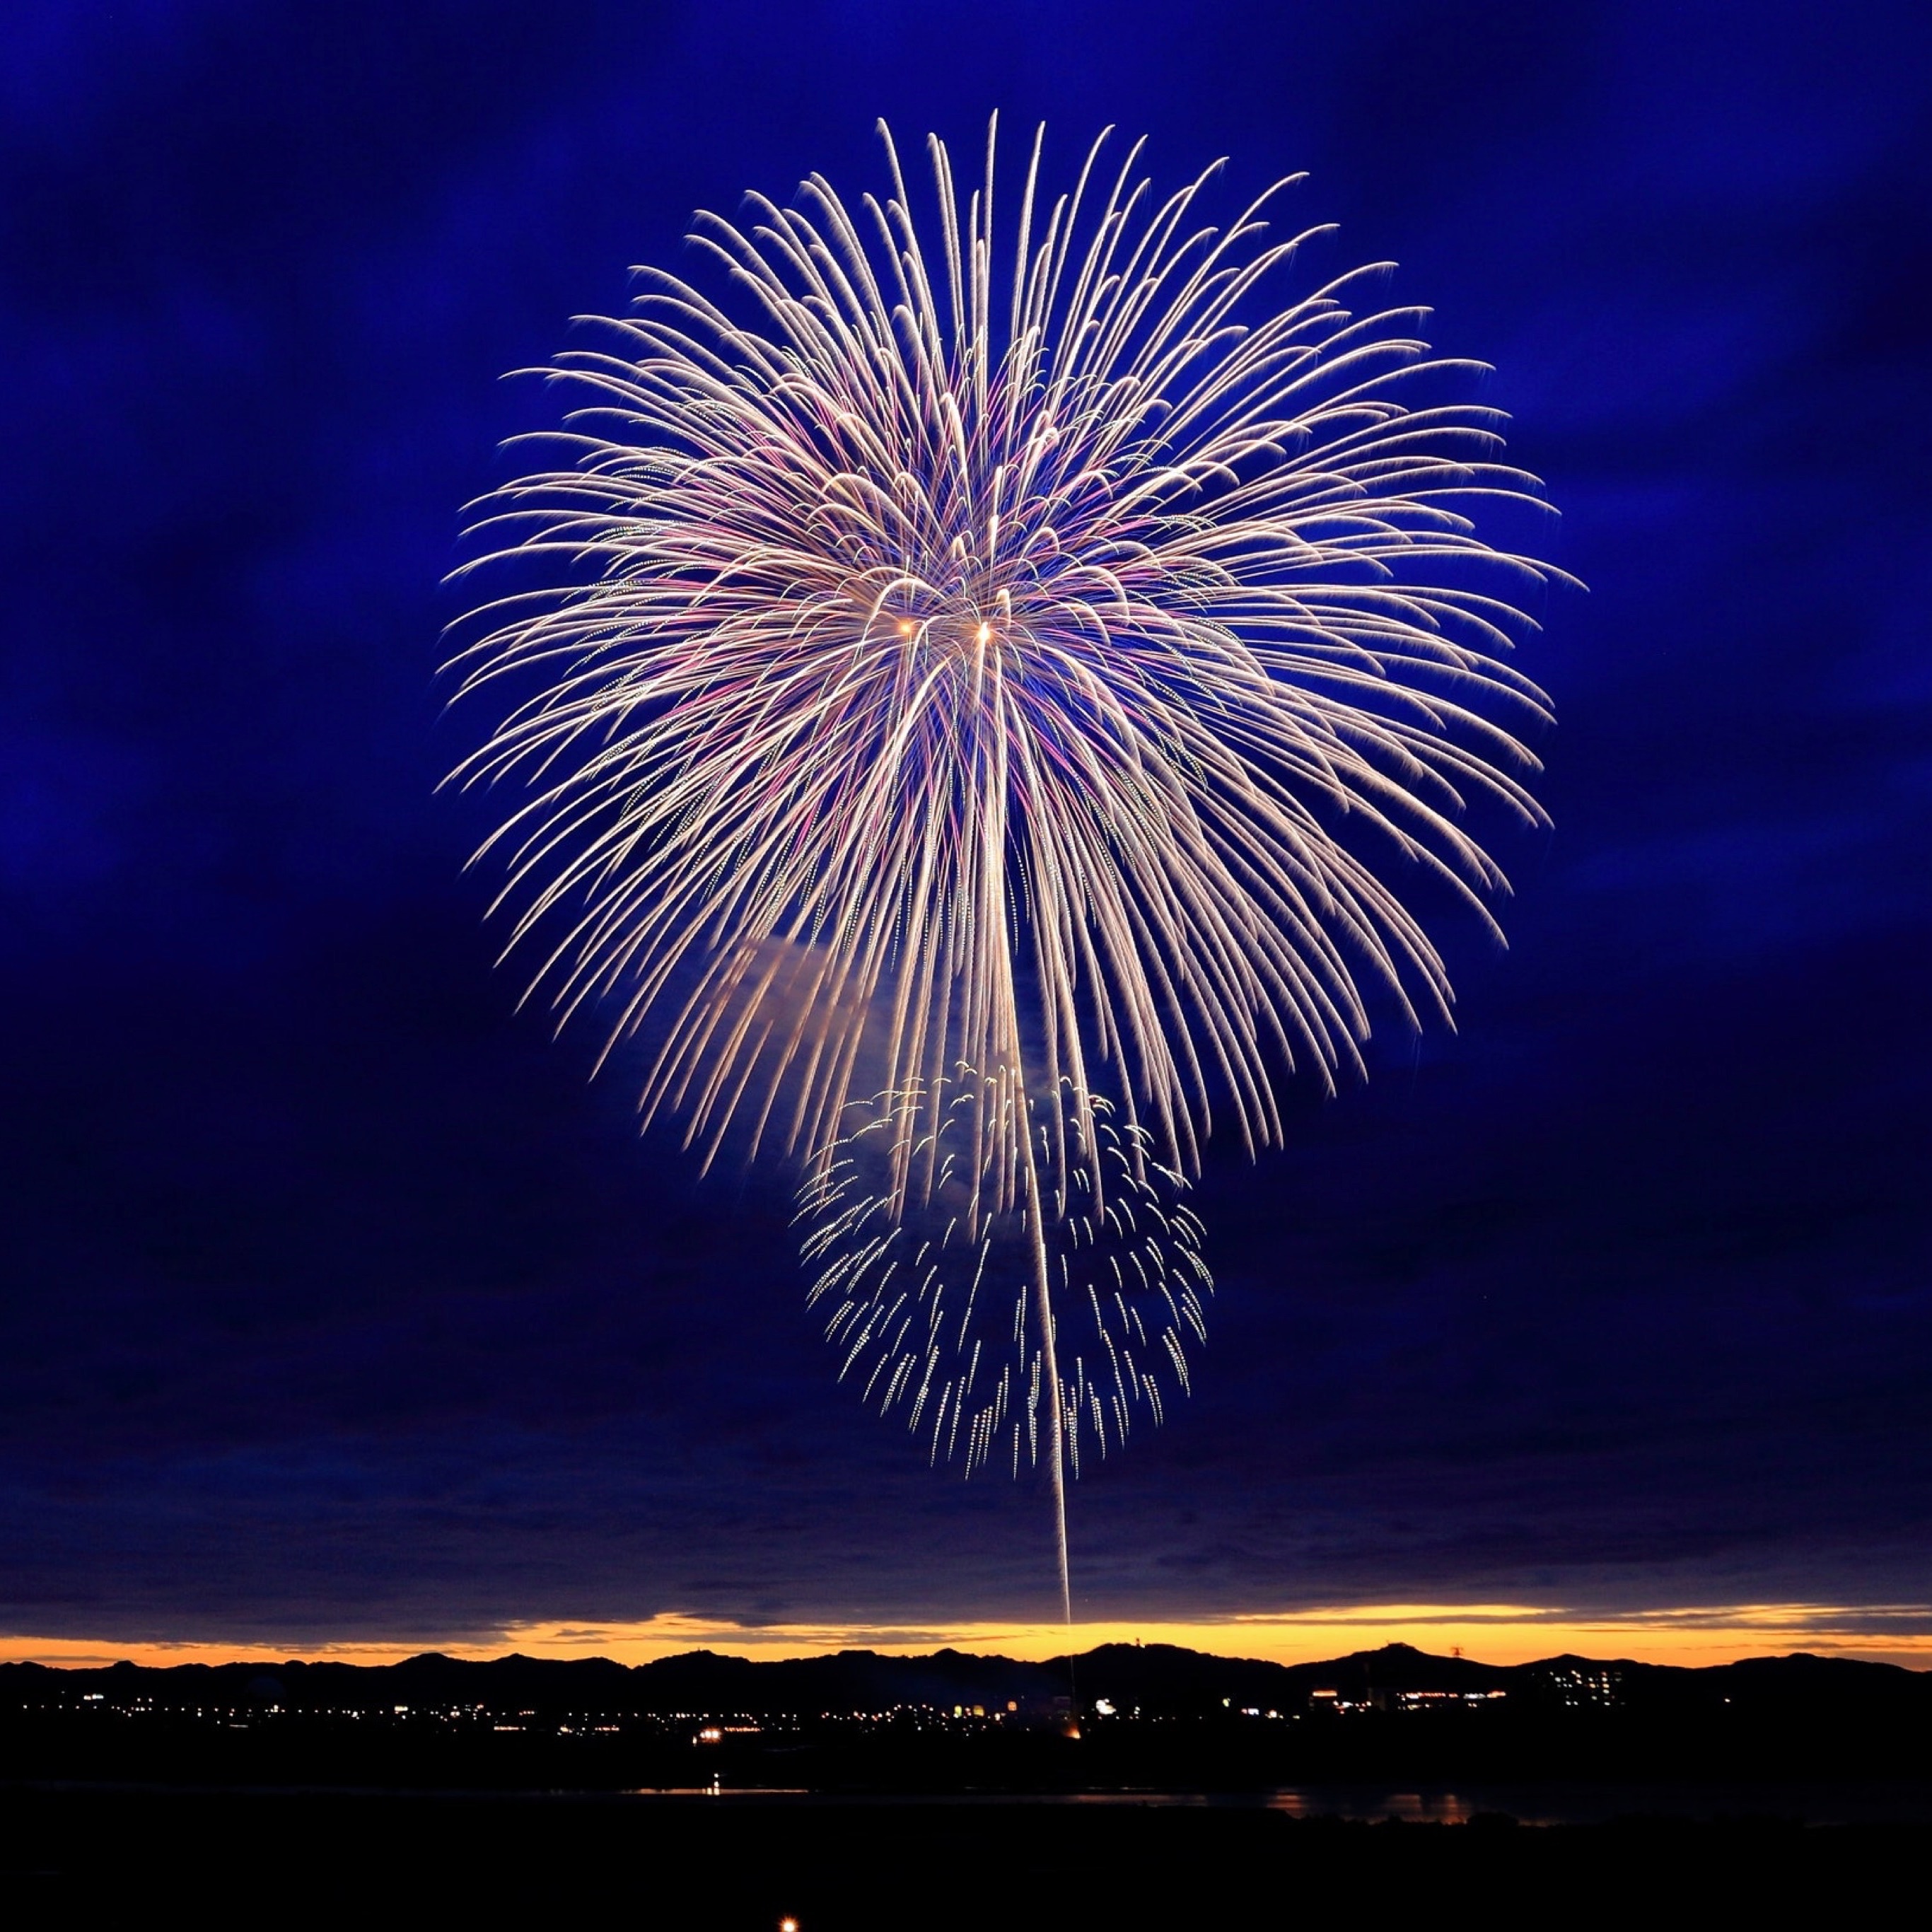 Wallpaper Weekends Fireworks For iPhone iPad Apple Watch